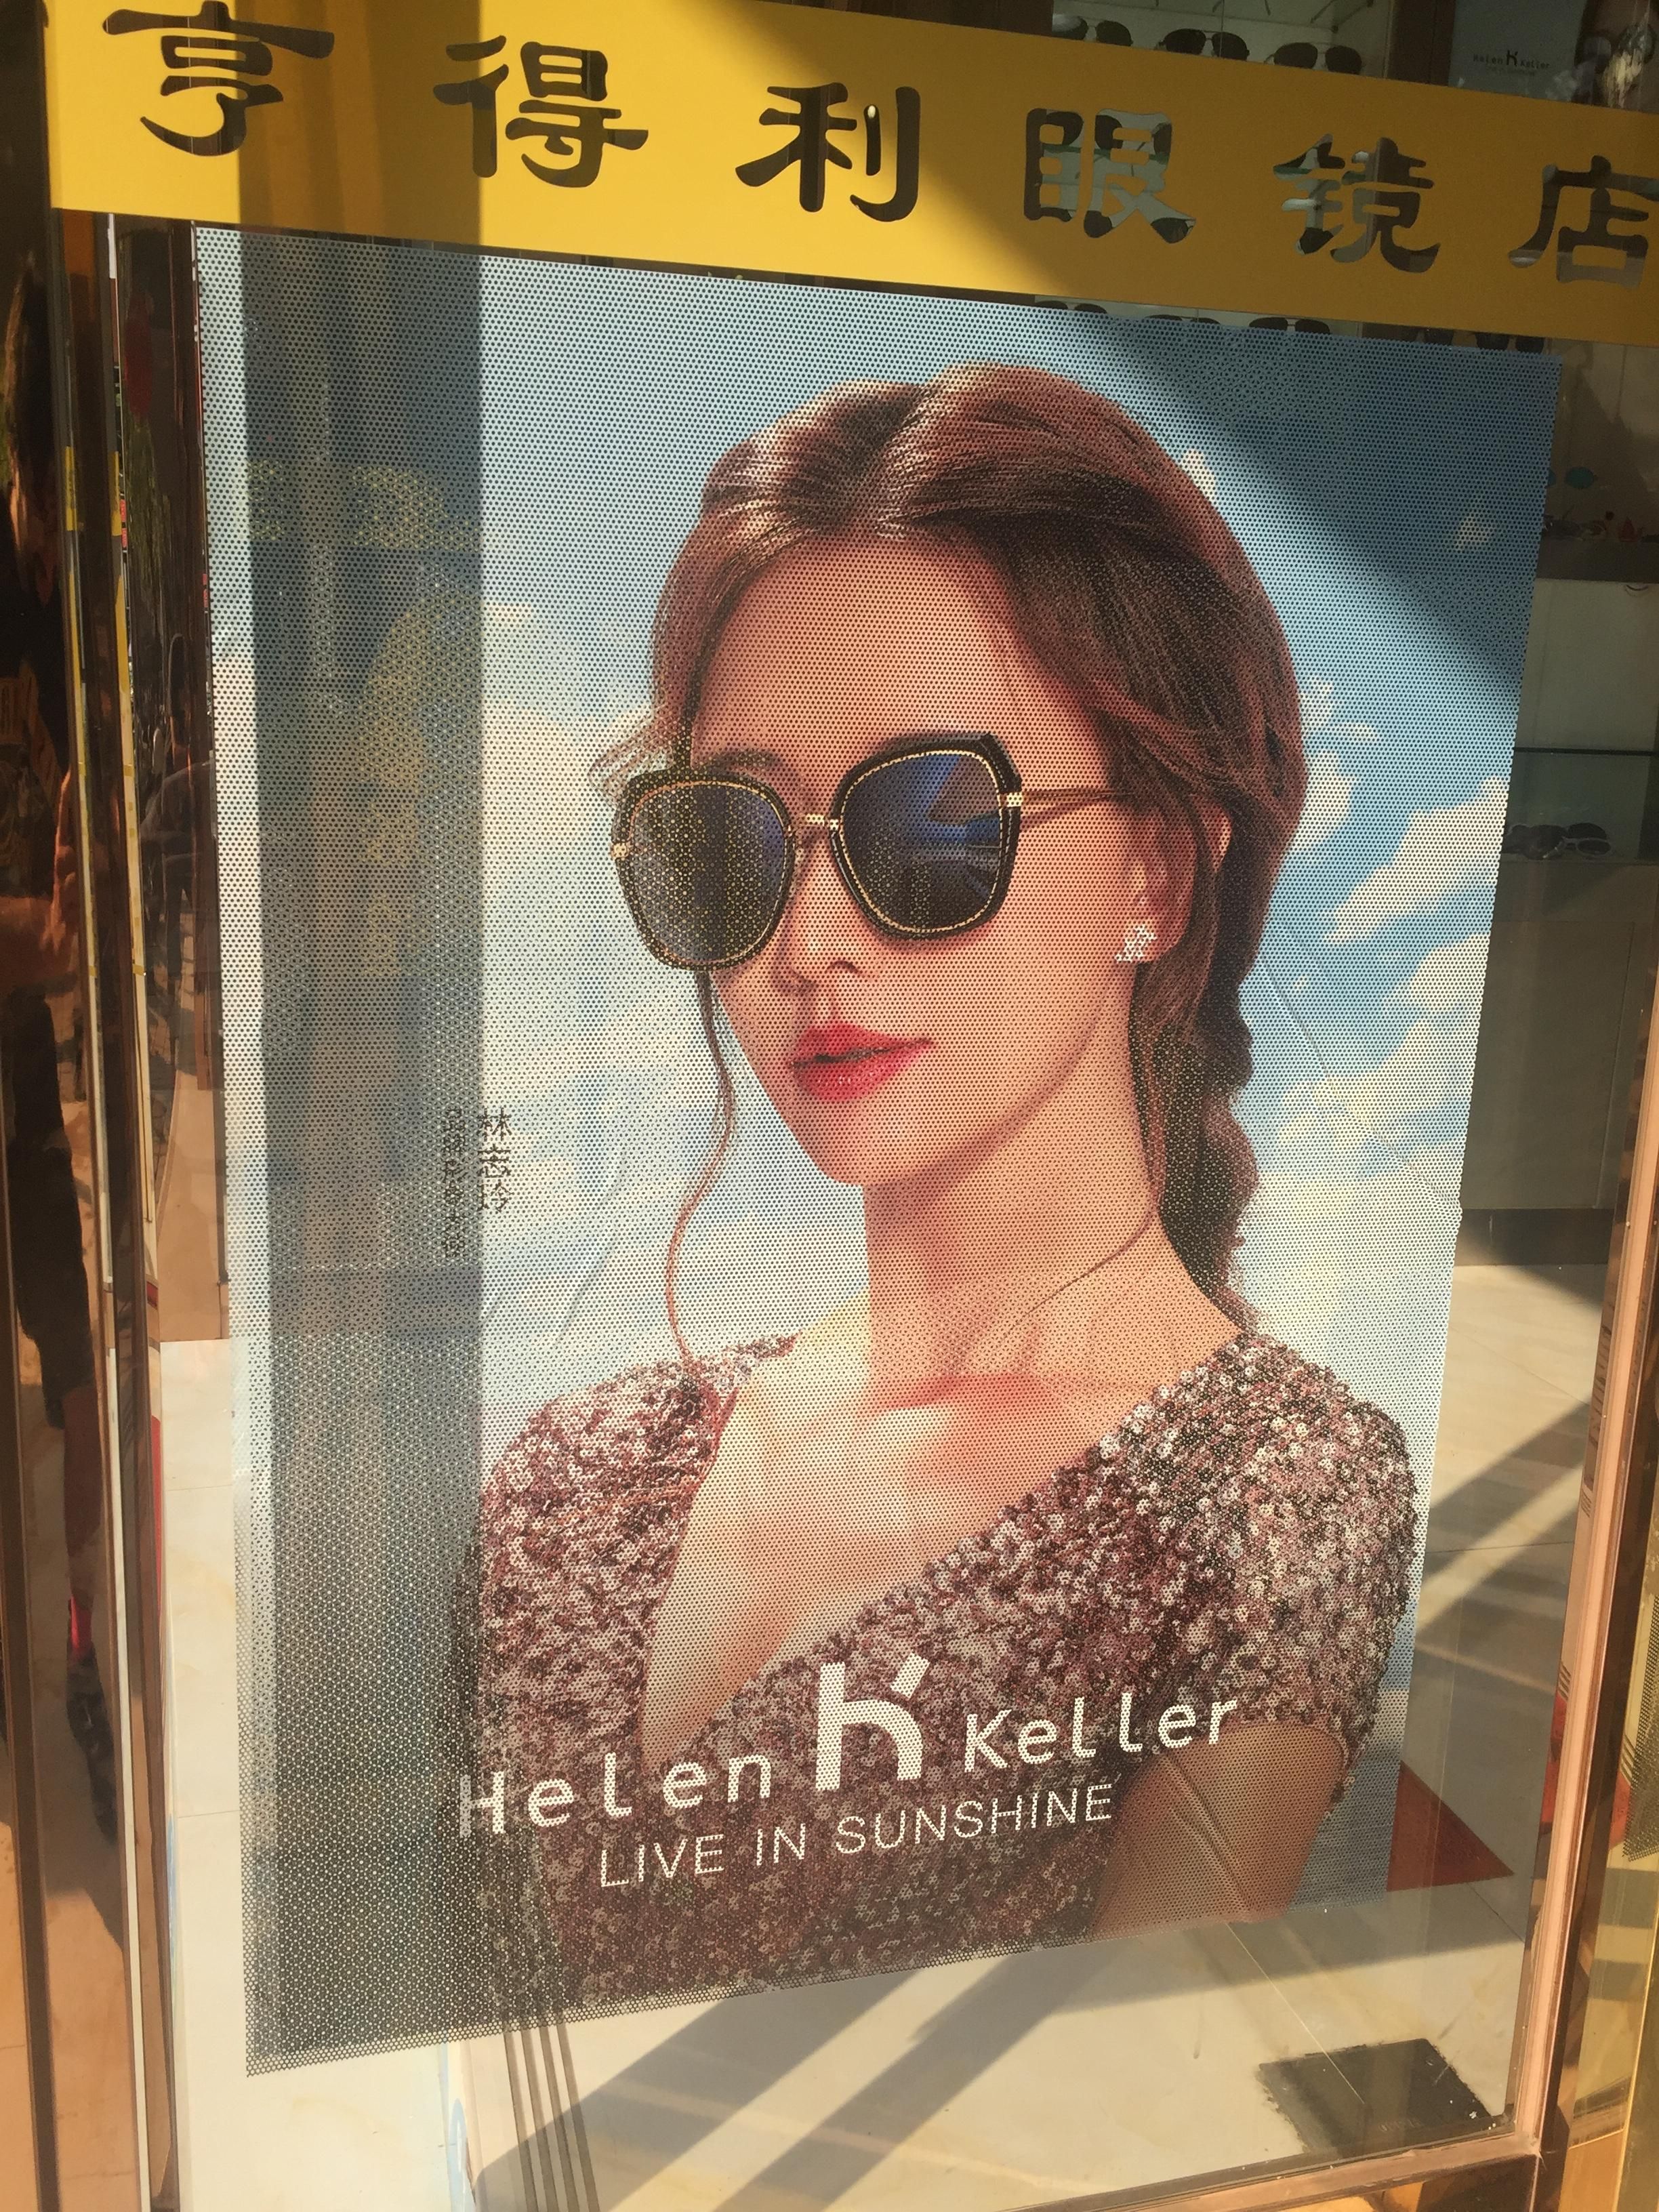 Walking around Yangshuo, China, was a bit surprised to see the name for this brand of sunglasses...